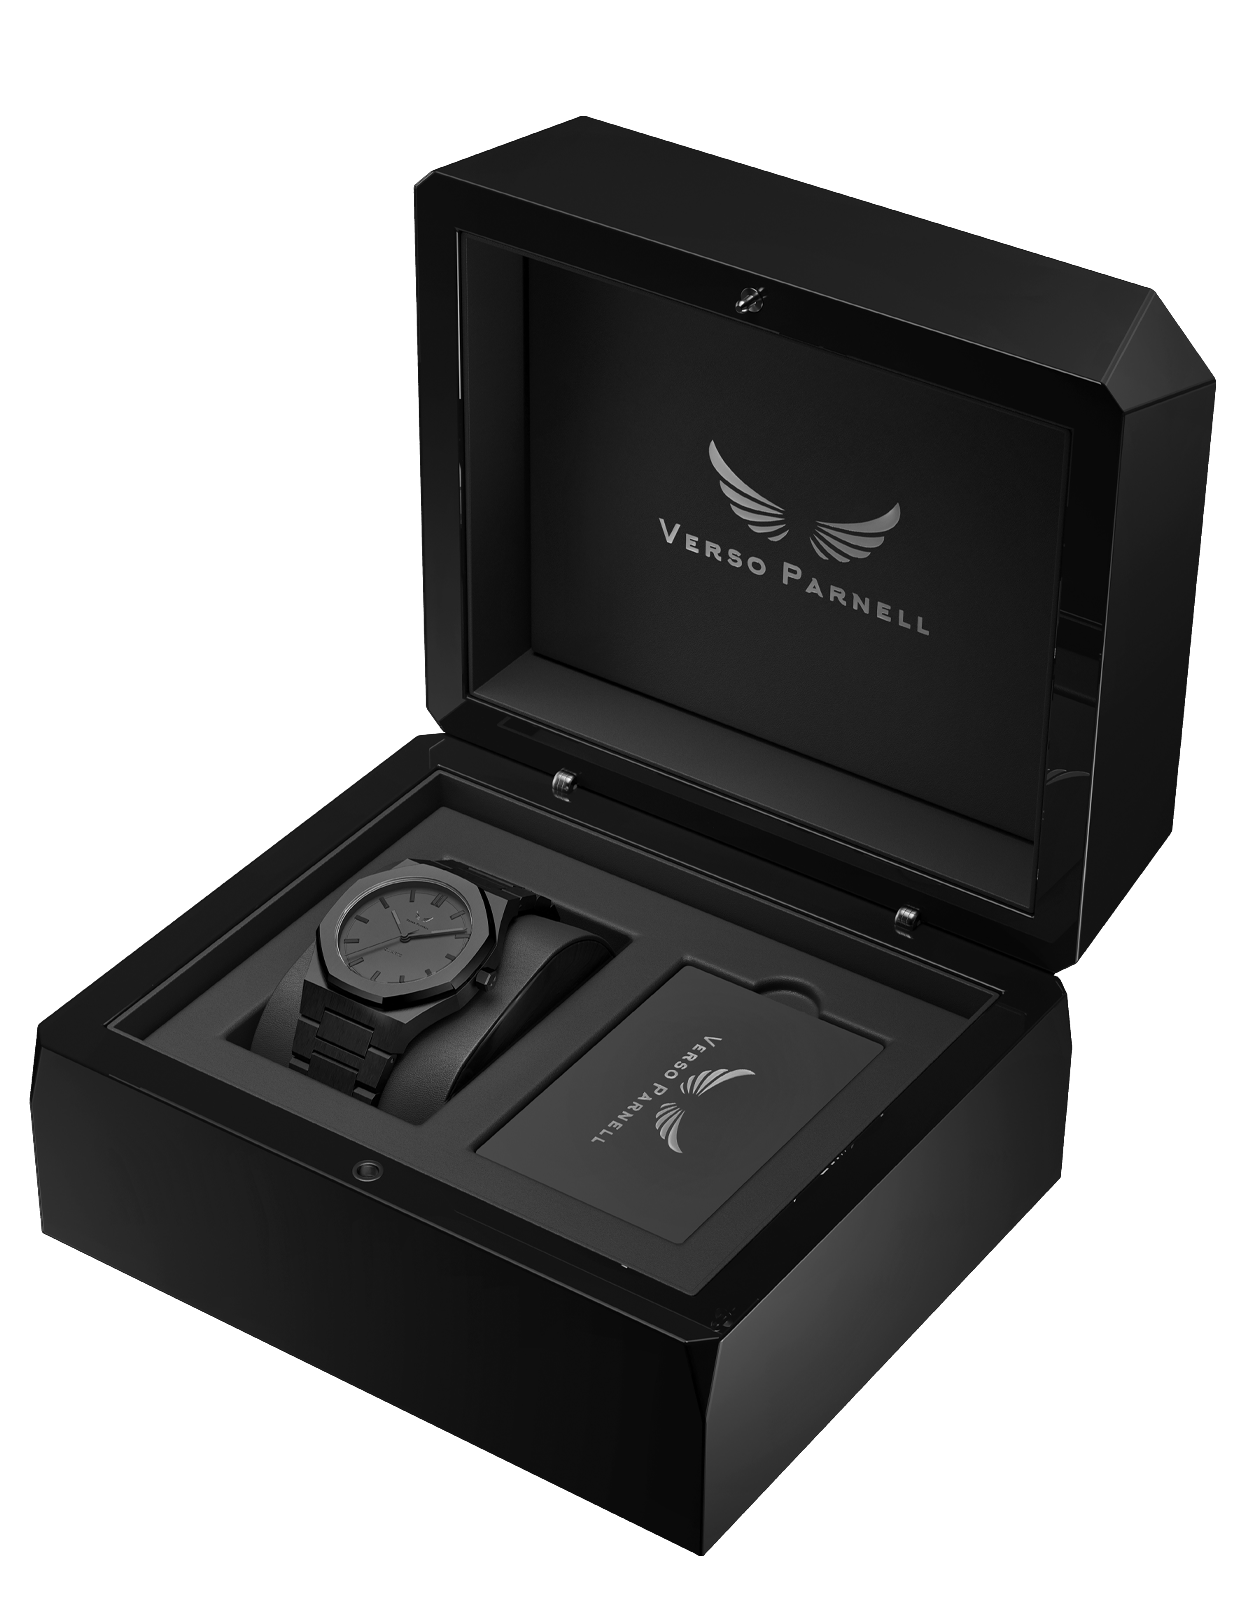 Get The Best Verso Parnell Watches